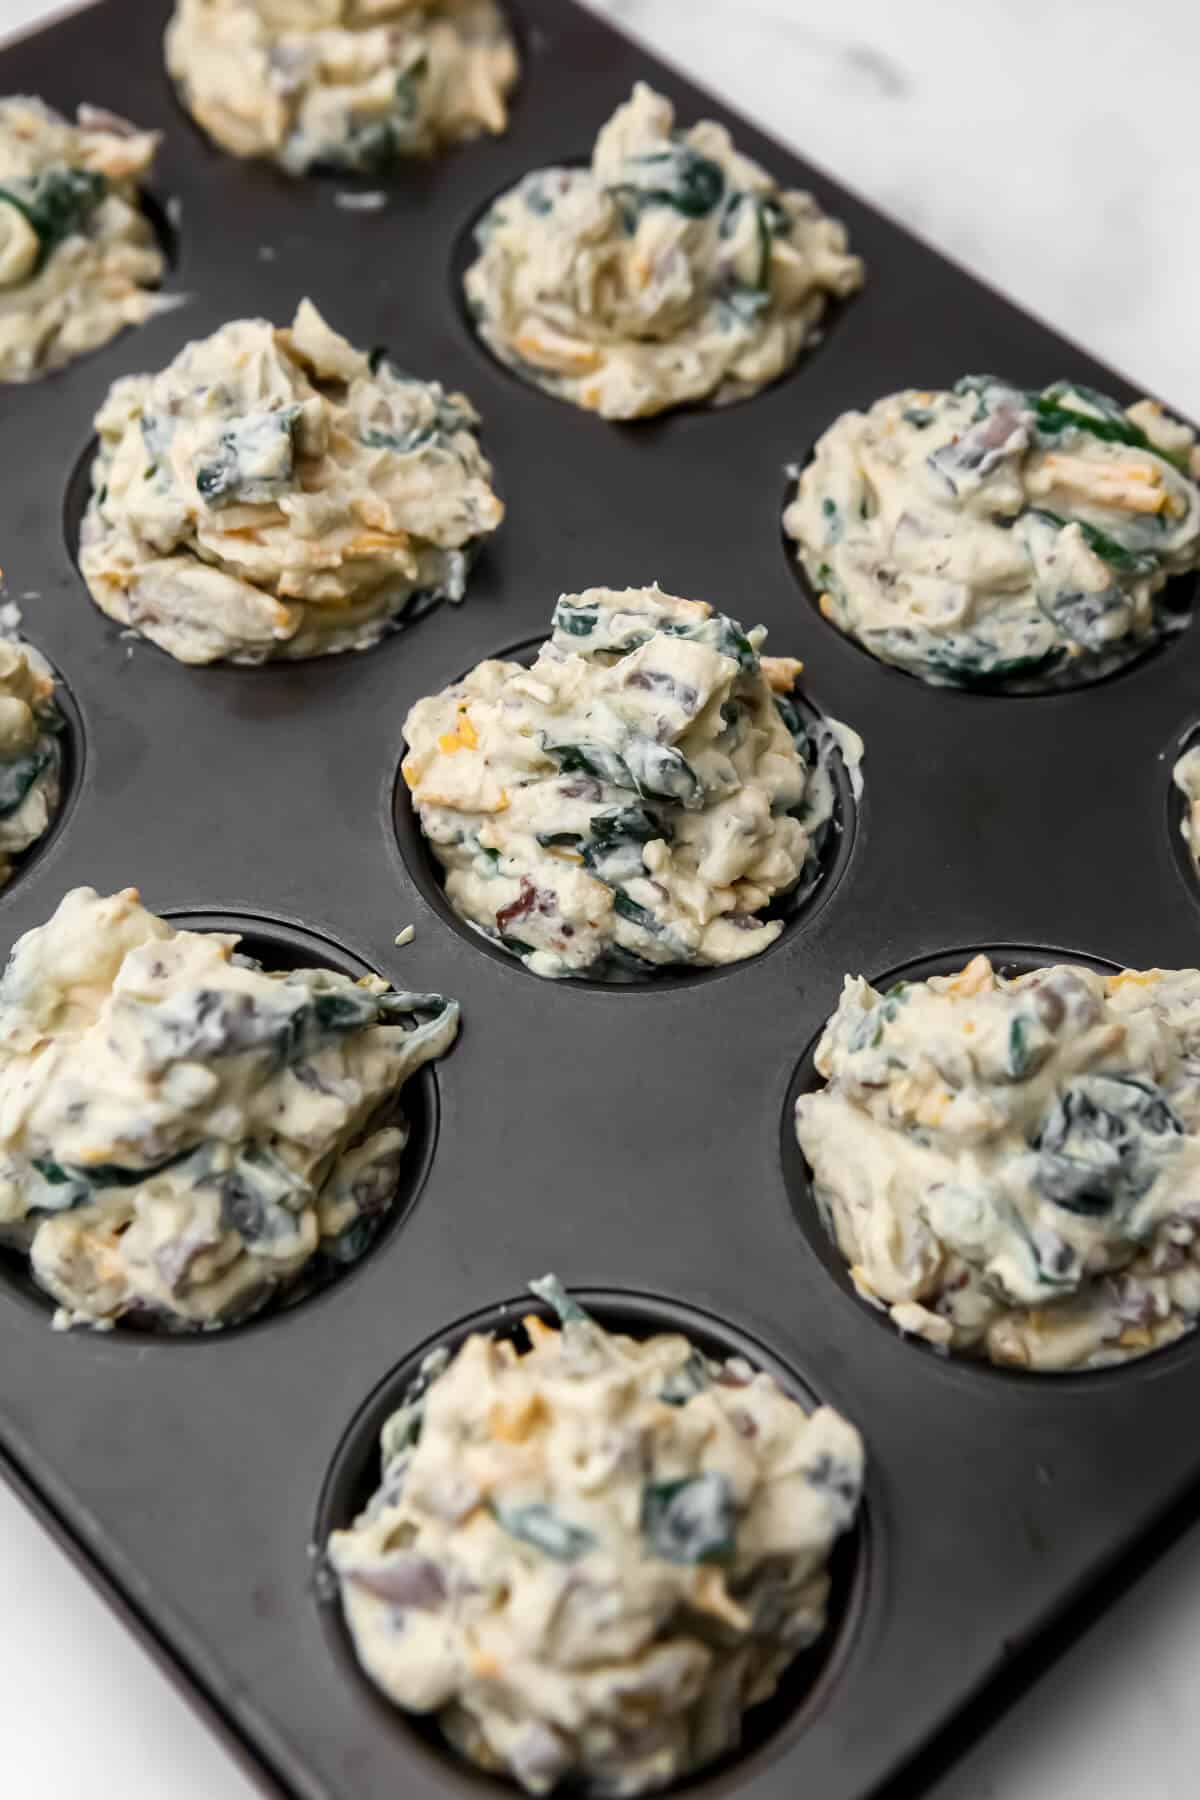 Blended tofu and veggies mixed into a batter and put in a muffin tin before baking.